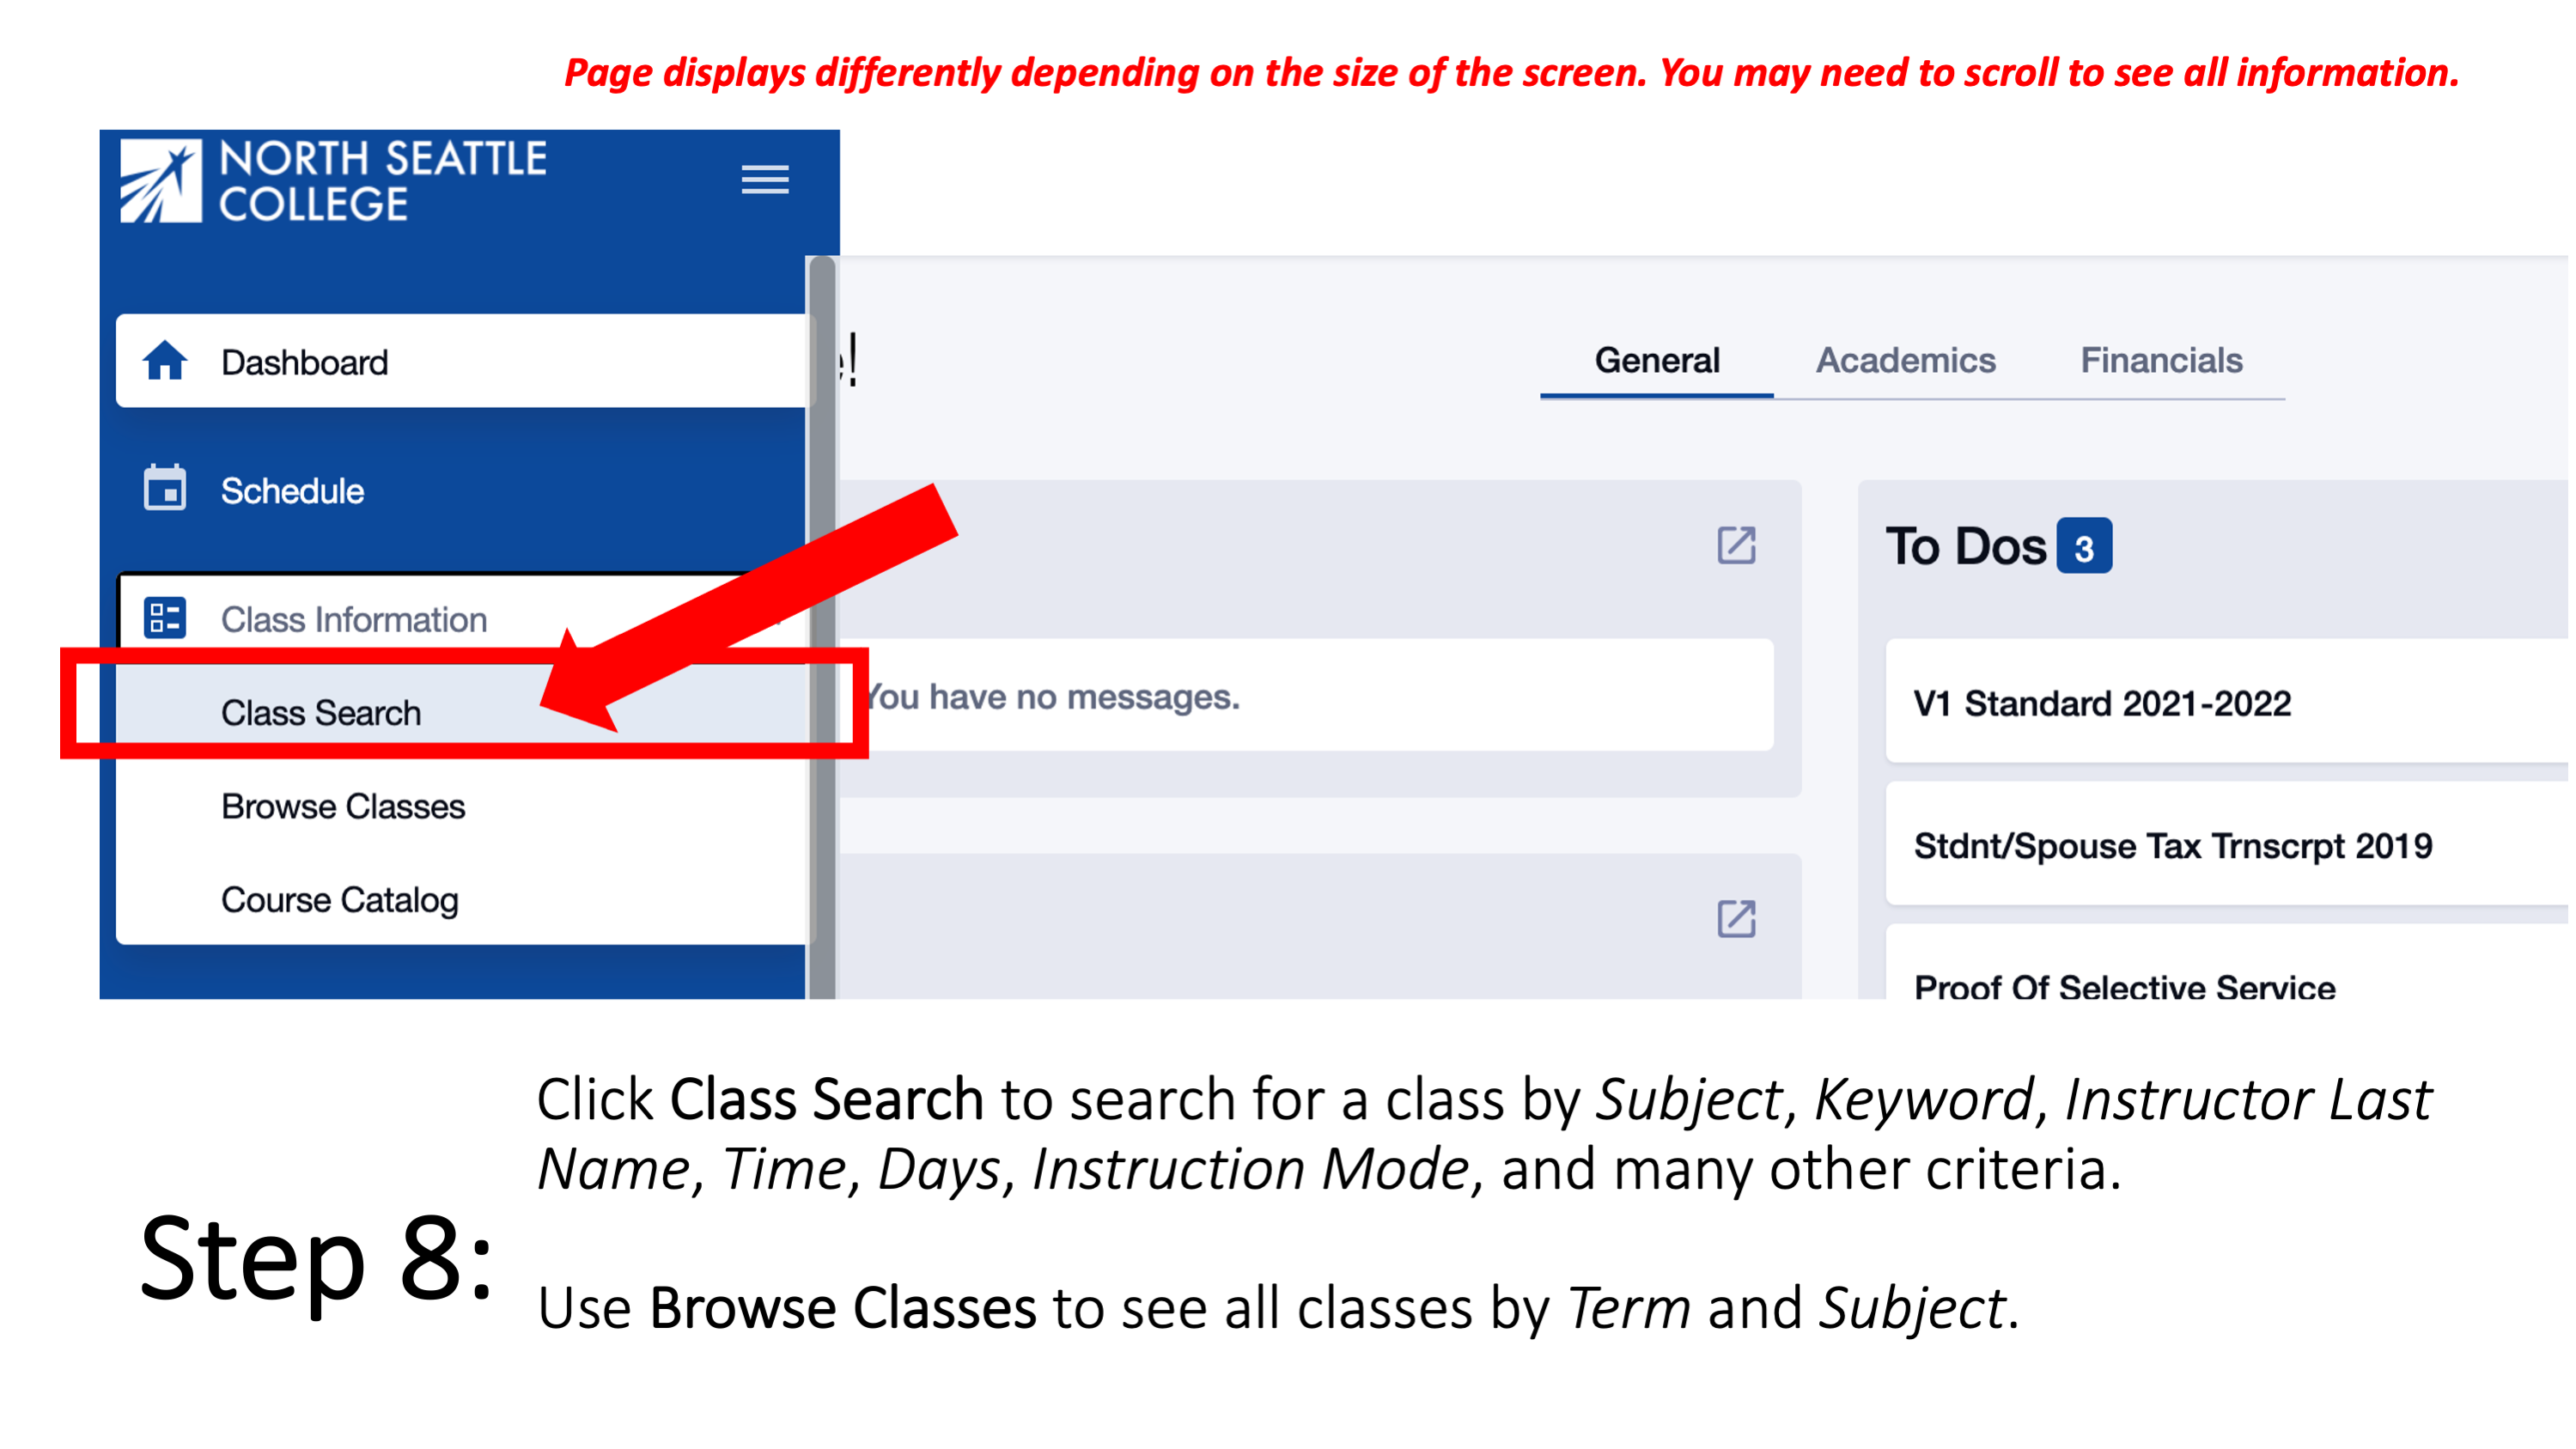 Step 8: Click Class Search to search for a class by Subject, Keyword, Instructor Last Name, Time, Days, Instruction Mode, and many other criteria. Use Browse Classes to see all classes by Term and Subject. Page displays differently depending on the size of the screen. You may need to scroll to see all information.